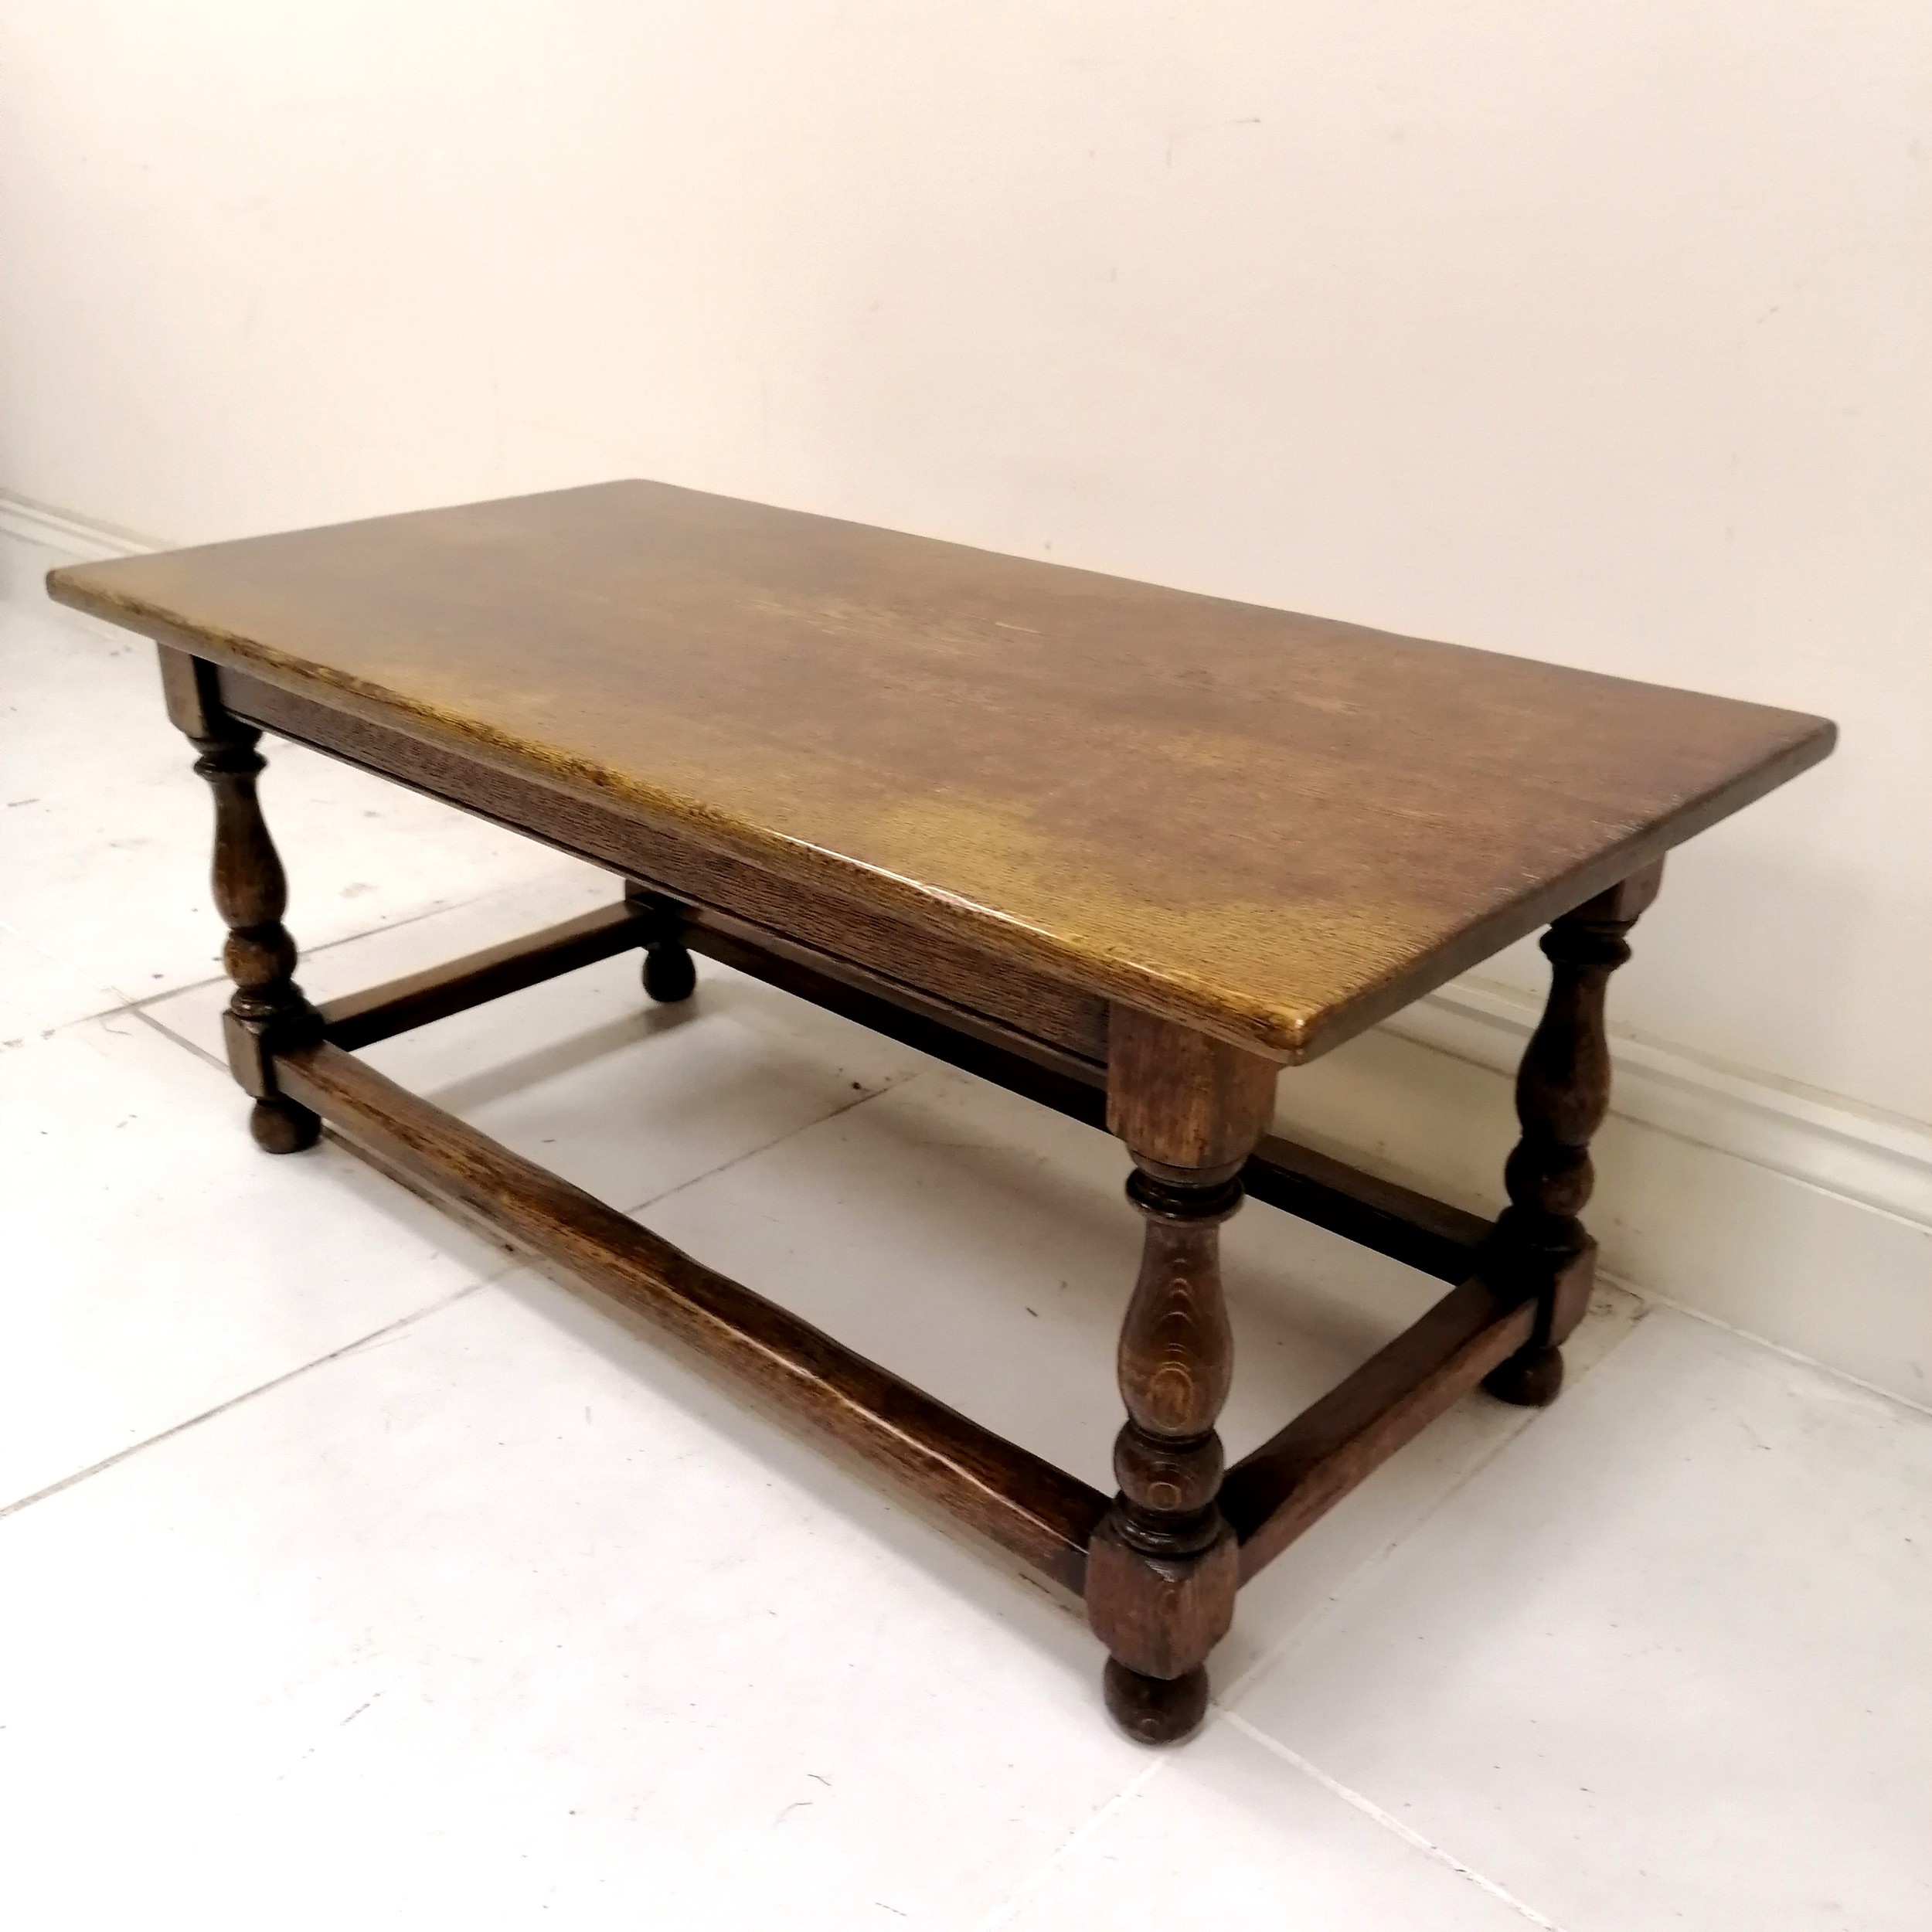 Oak refectory style coffee table with stretchered and turned base, in good used condition, 107 cm